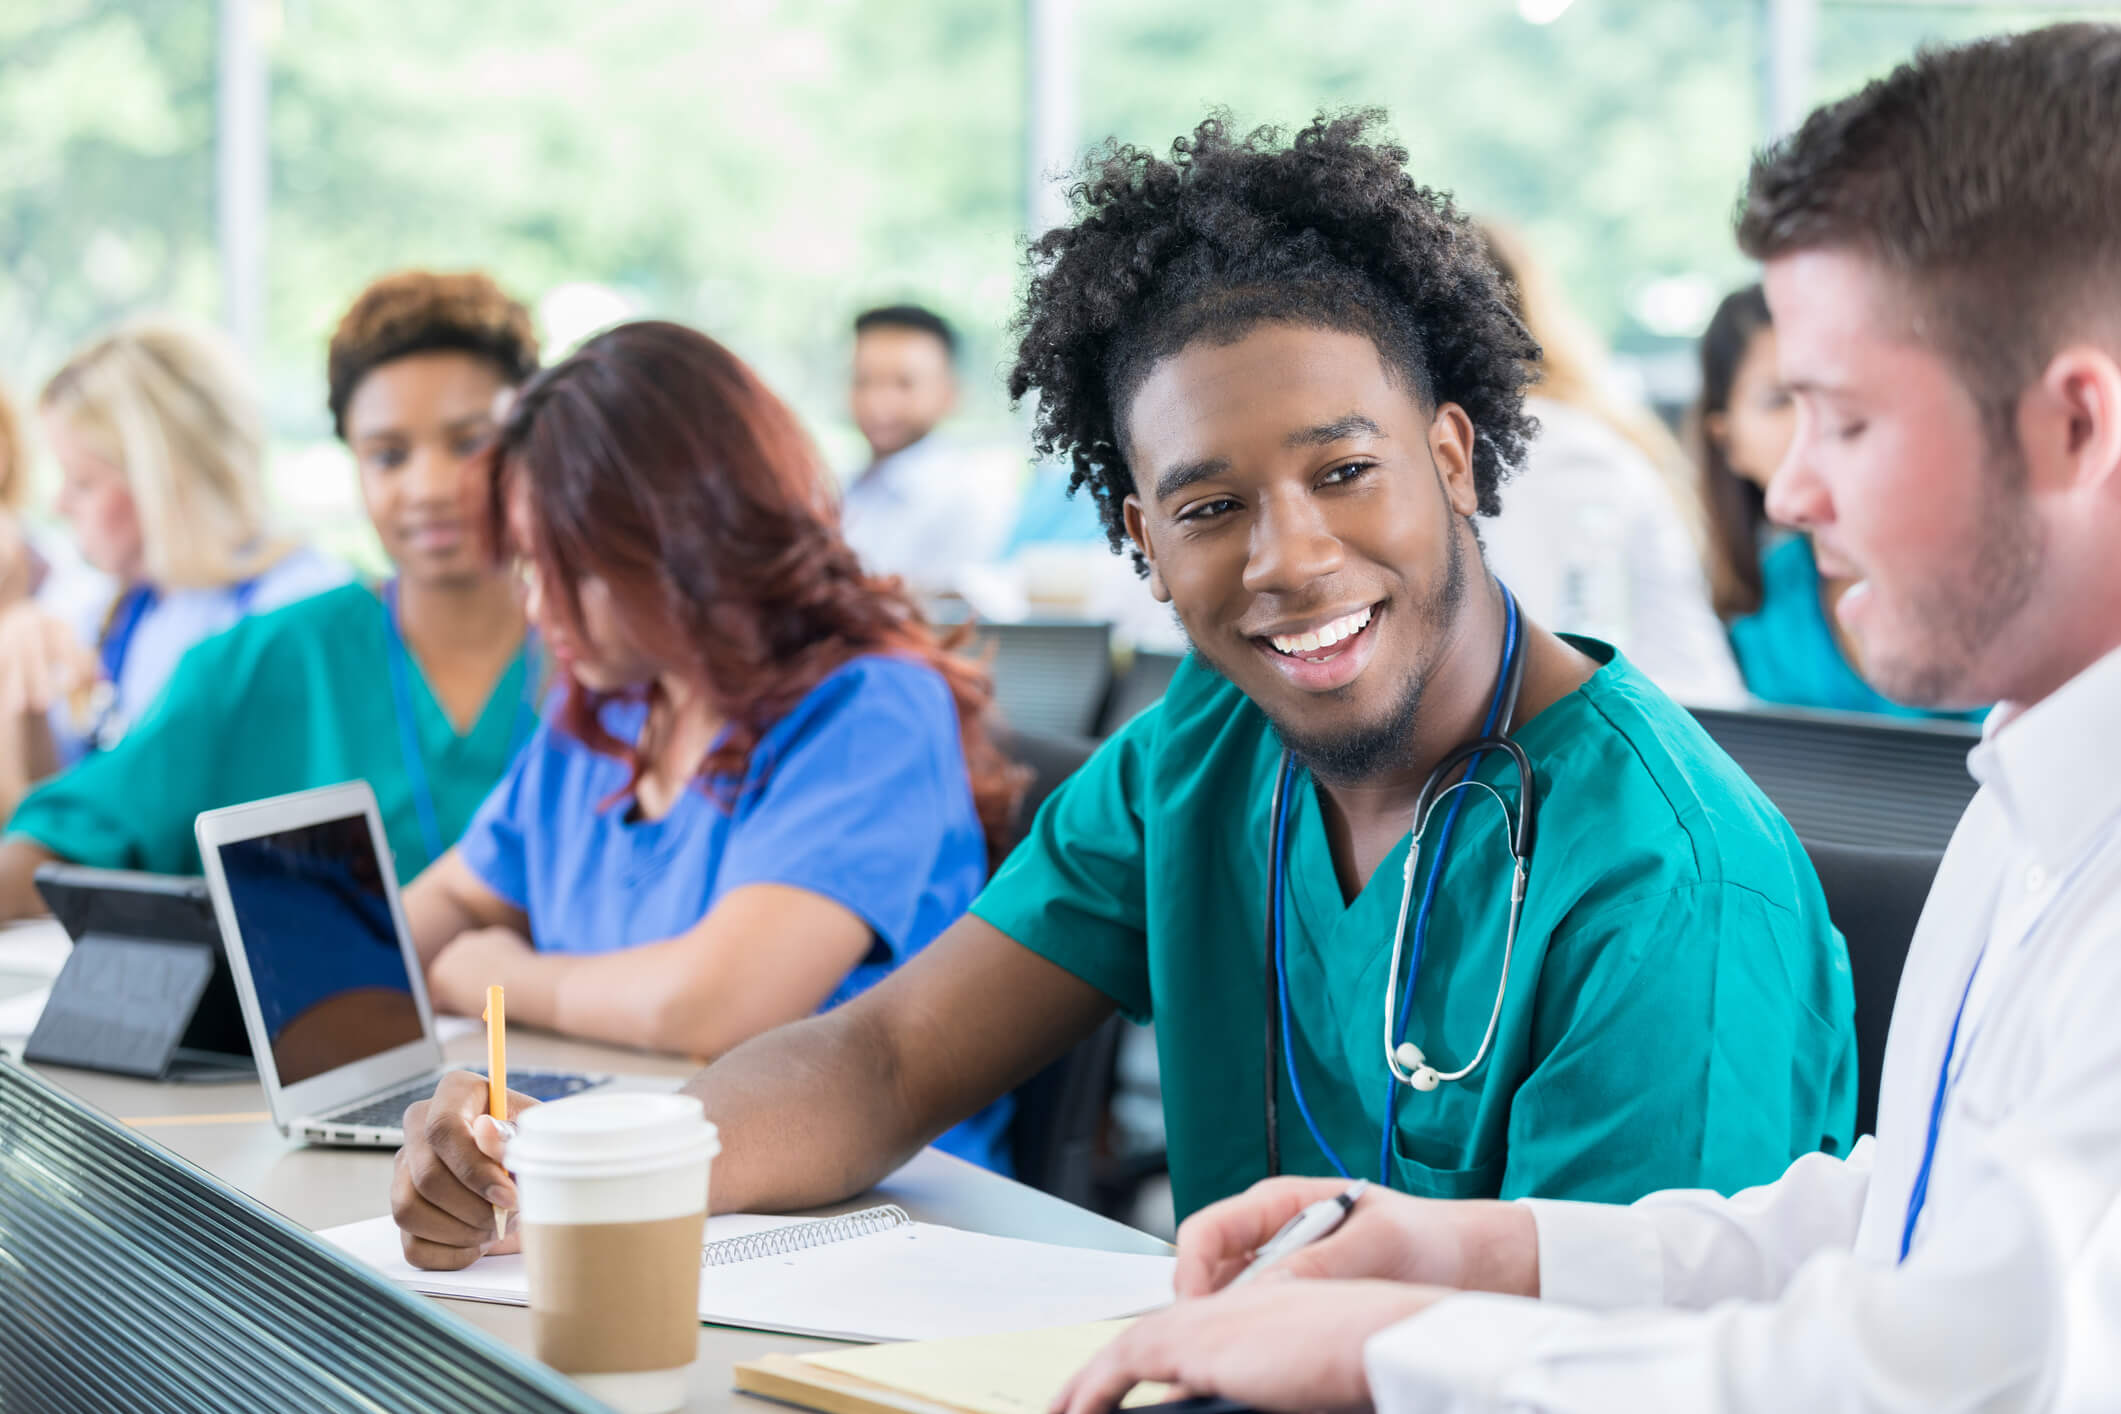 A young African American nursing school student is discussing class material with his instructor. The student is wearing teal green scrubs, and is taking notes and smiling as he listens to his instructor explain. The instructor is kneeling next to him and showing him something on a notepad. Other students are studying in the background.